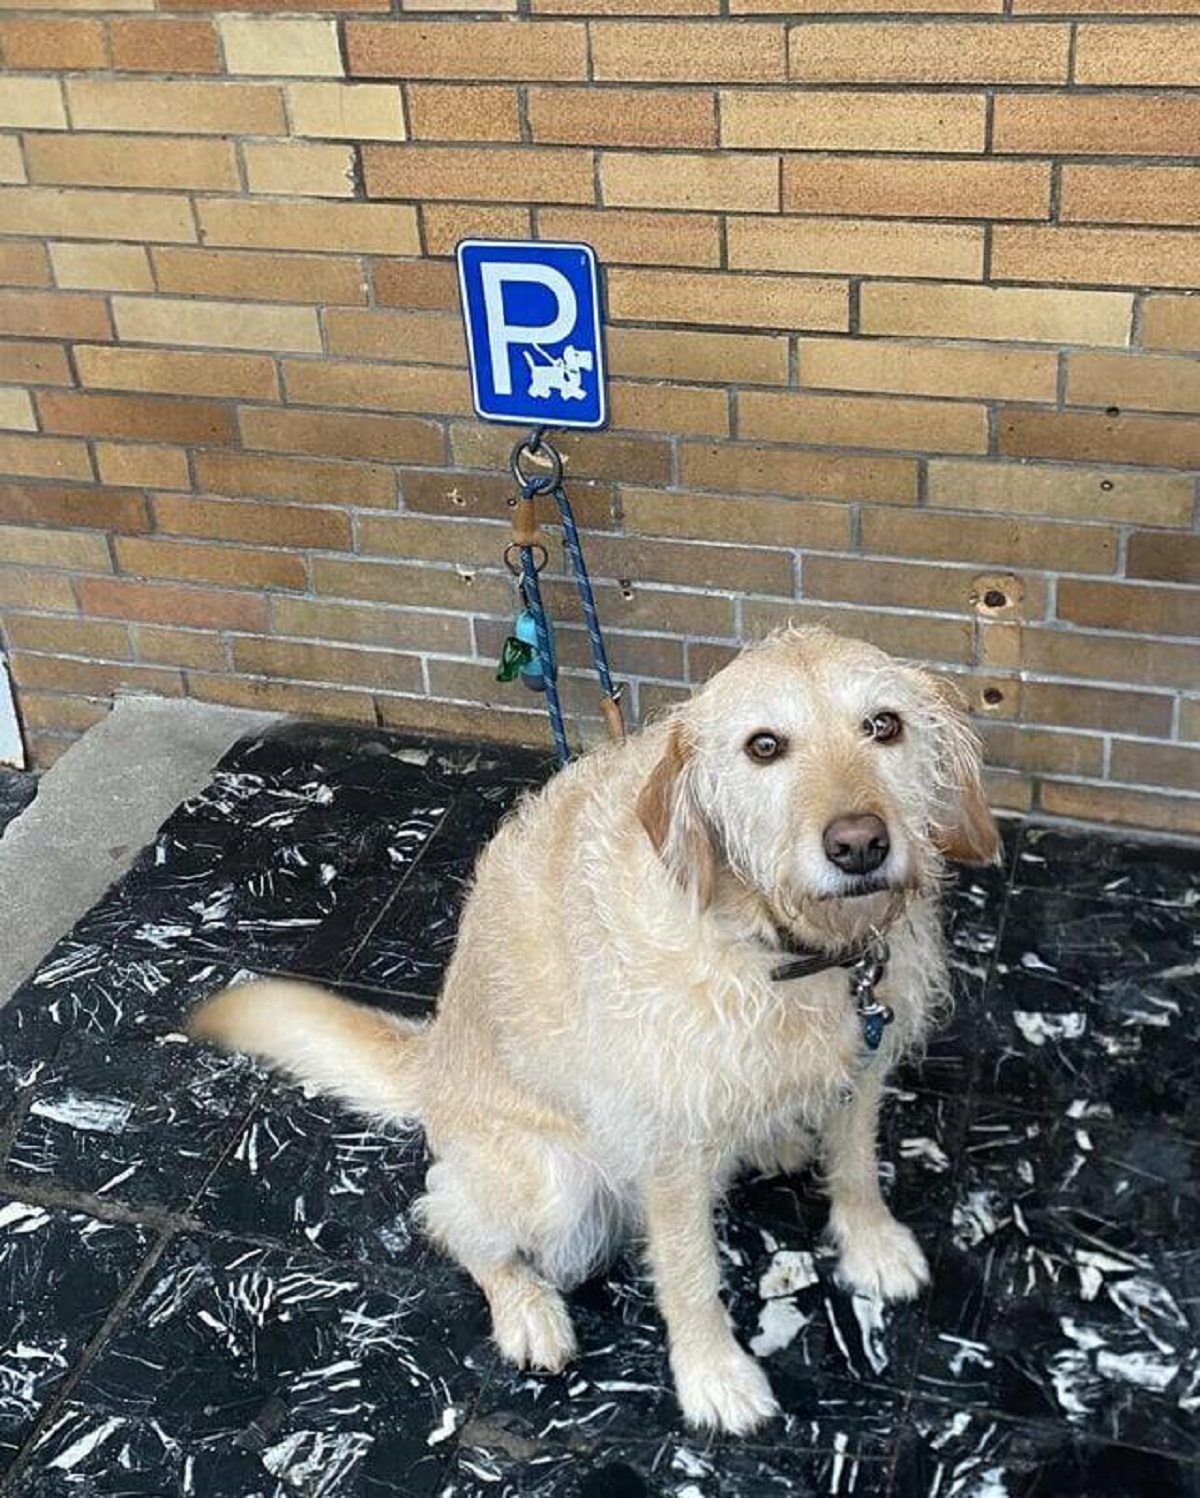 "There’s a dog parking spot in front of this drug store in Germany"